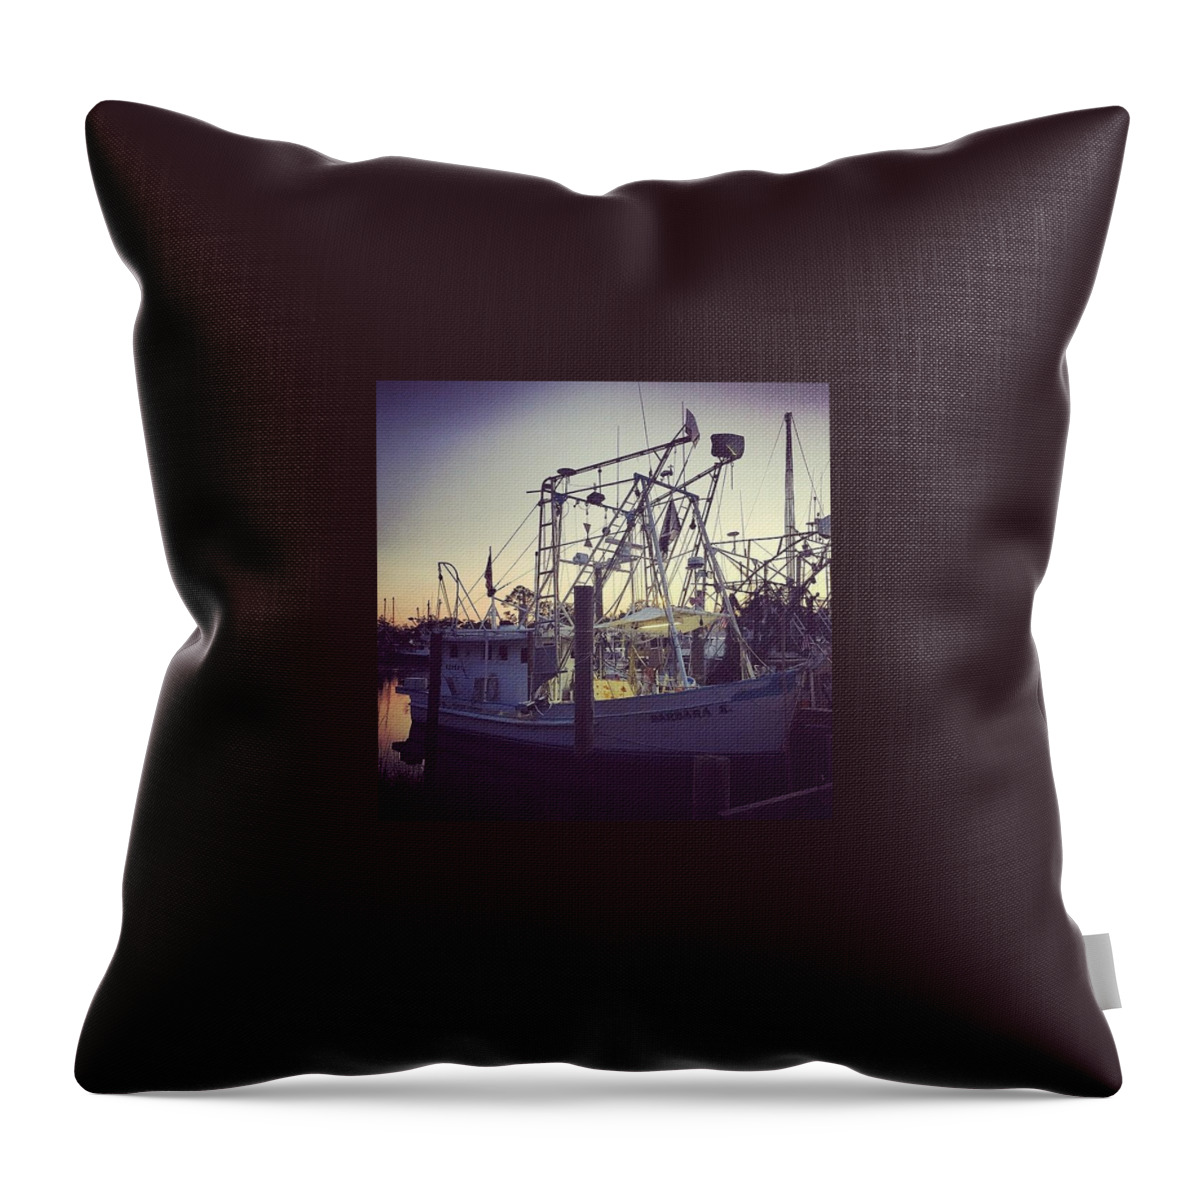 Harbor Throw Pillow featuring the photograph Harbor Shrimp Boat by Joan McCool